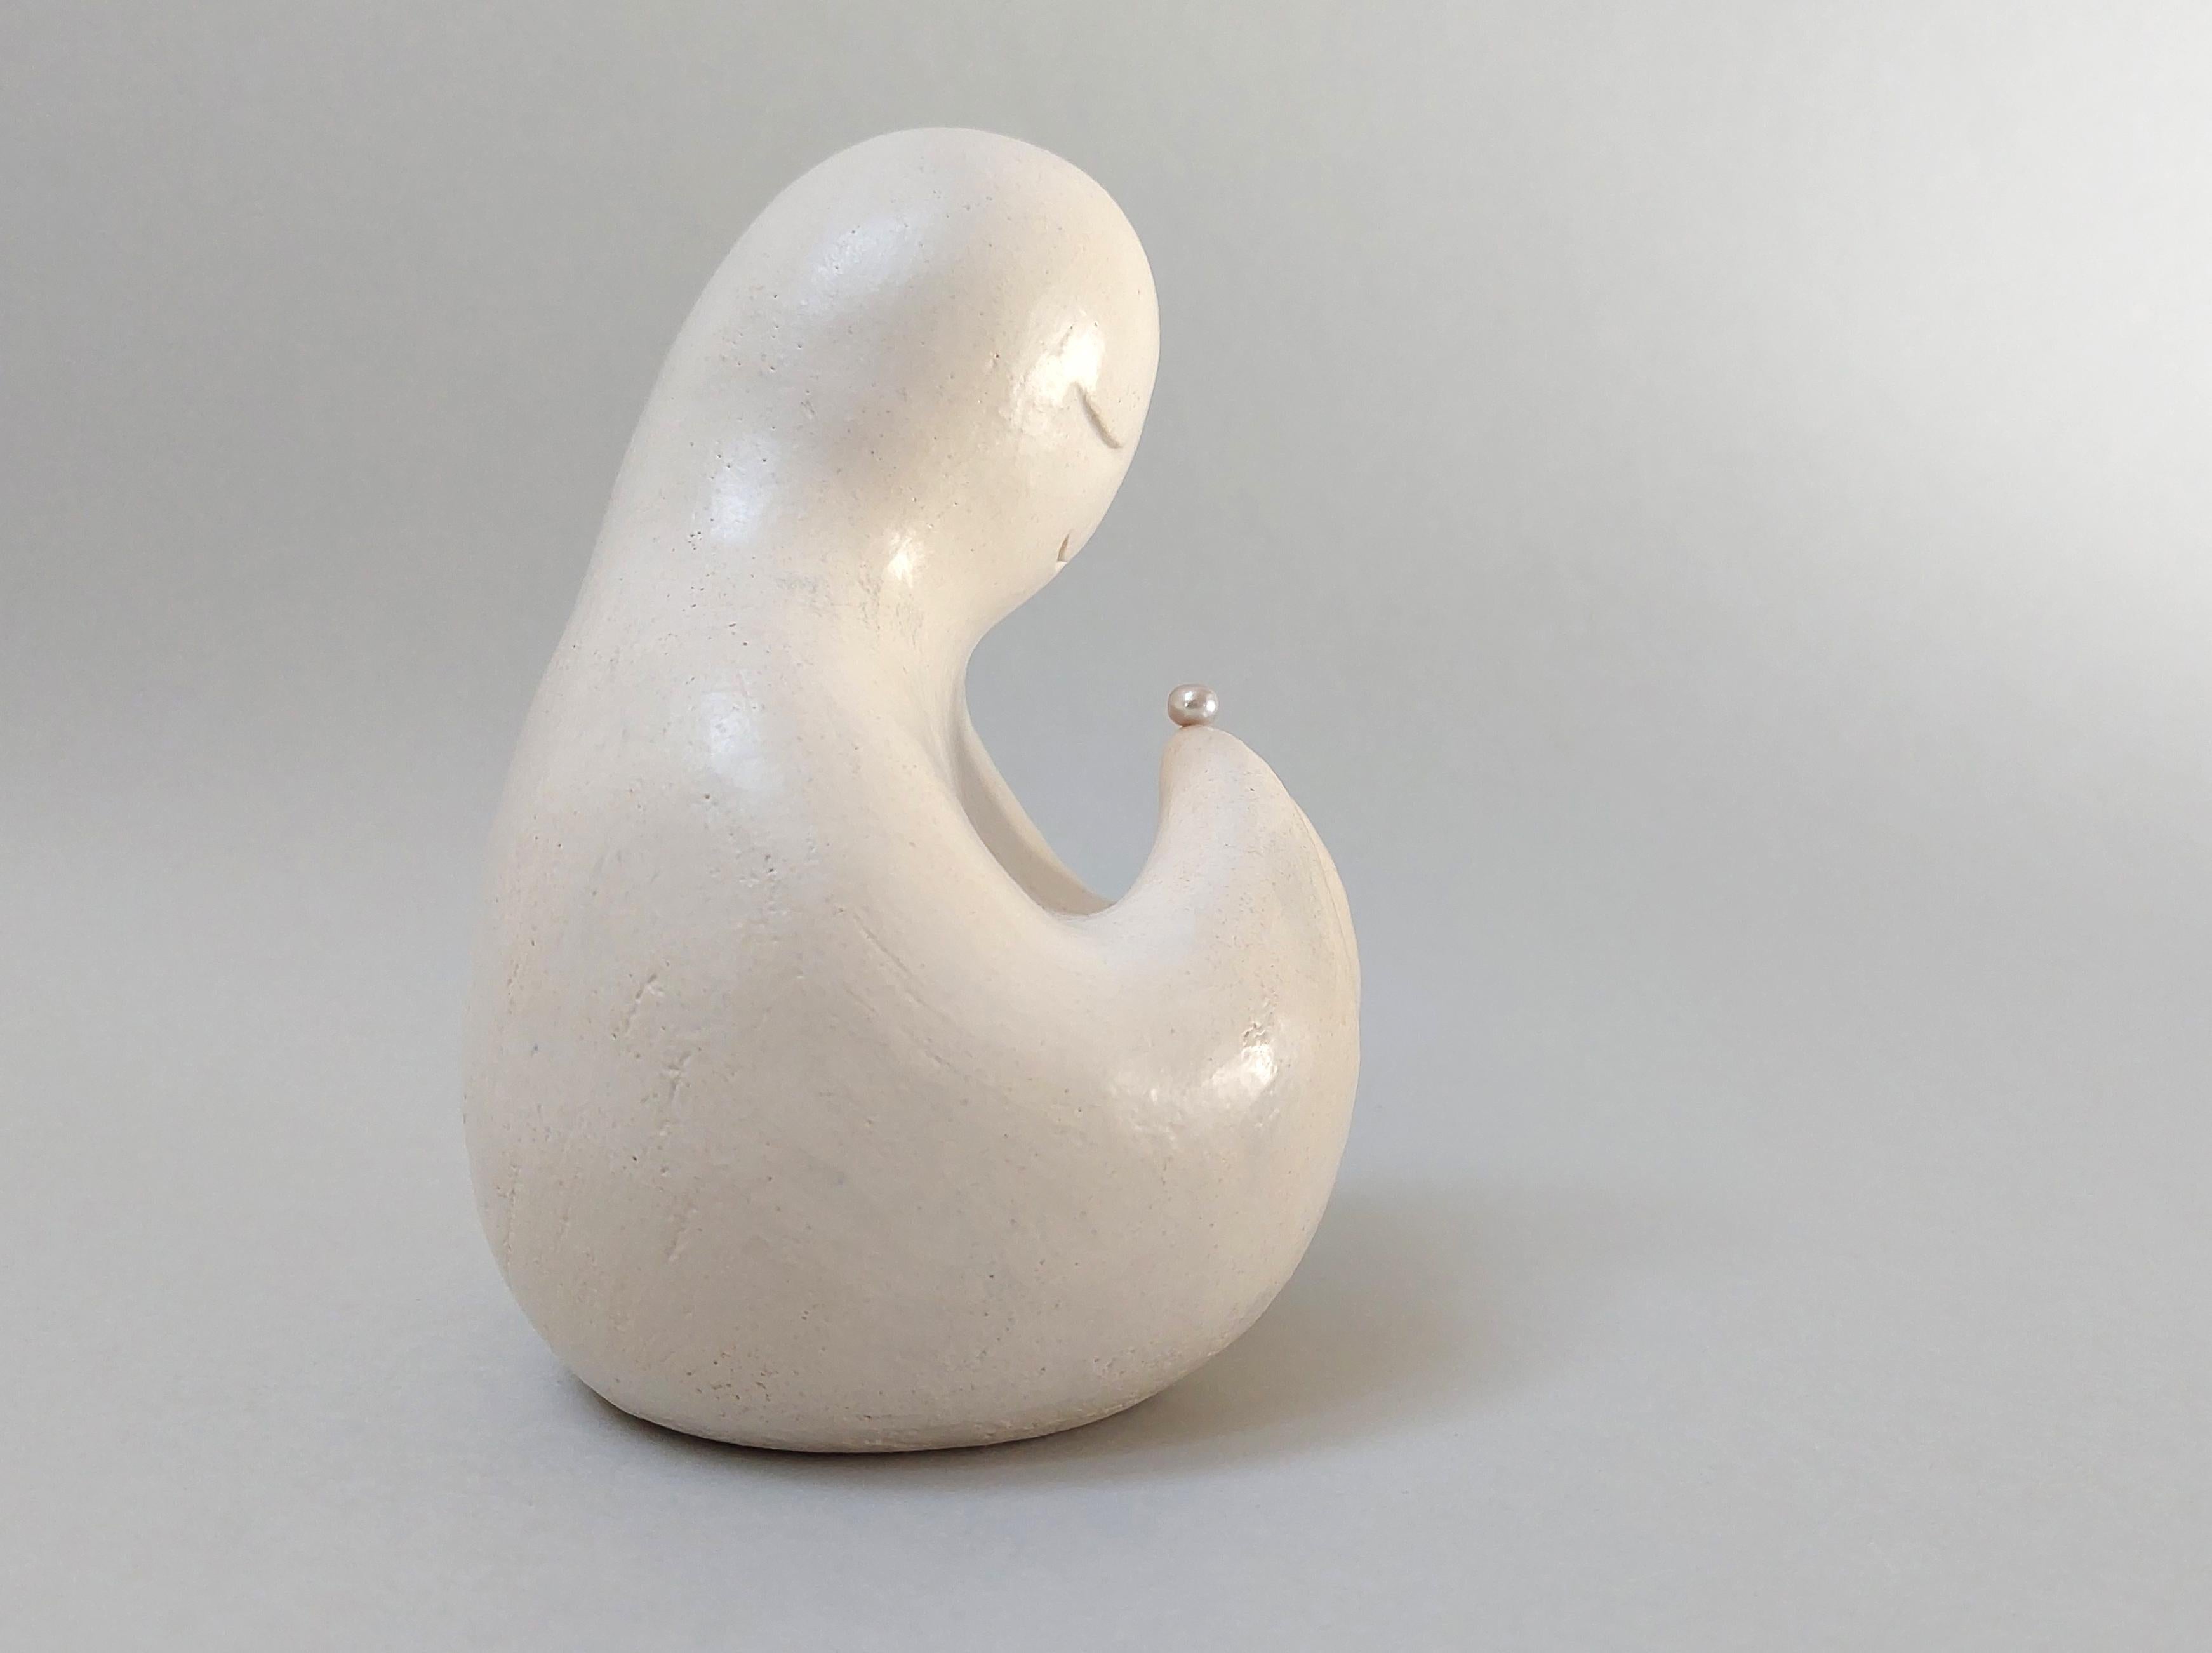 Figurative Ceramic Sculpture. Pearl.
During the course of life, each of us tries to find something valuable in the outside world. But there comes a moment when a person realizes that the real treasure is inside..... He admires its beauty, feels calm